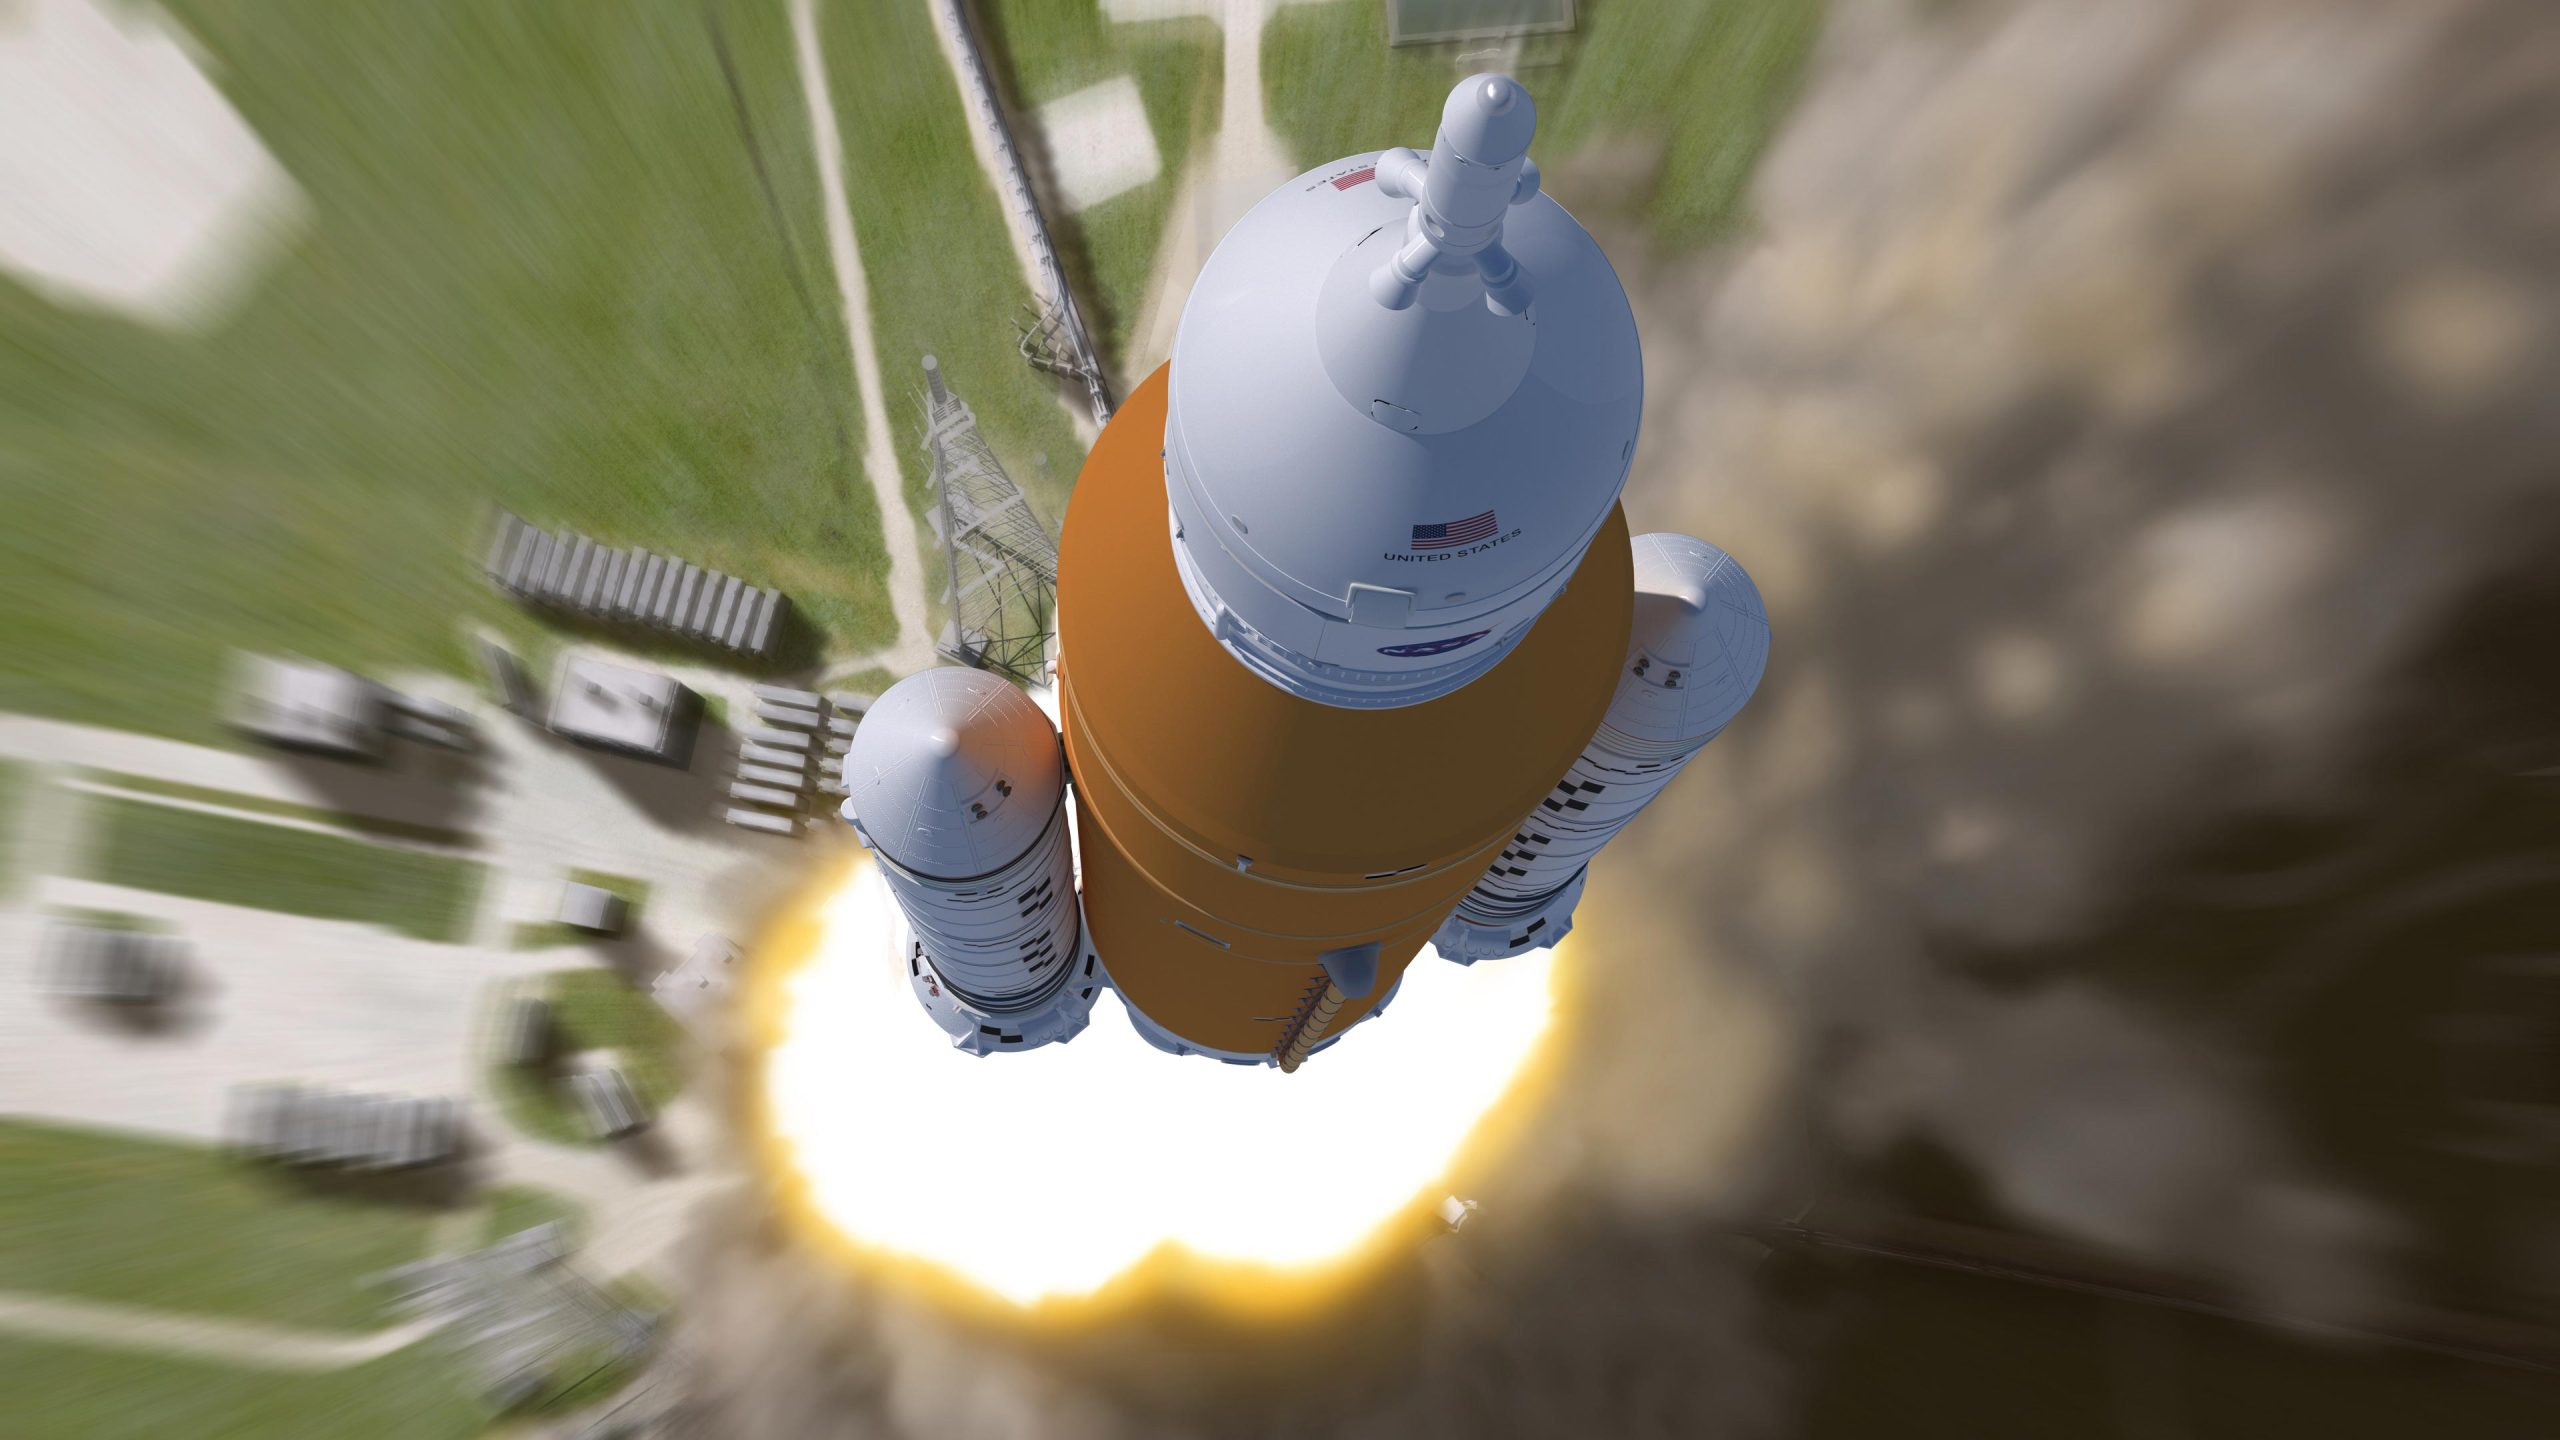 This artist’s rendering shows an aerial view of the liftoff of NASA’s Space Launch System (SLS) rocket. This Block 1 crew configuration of the rocket will send the first three Artemis missions to the Moon. Credit: NASA/MSFC